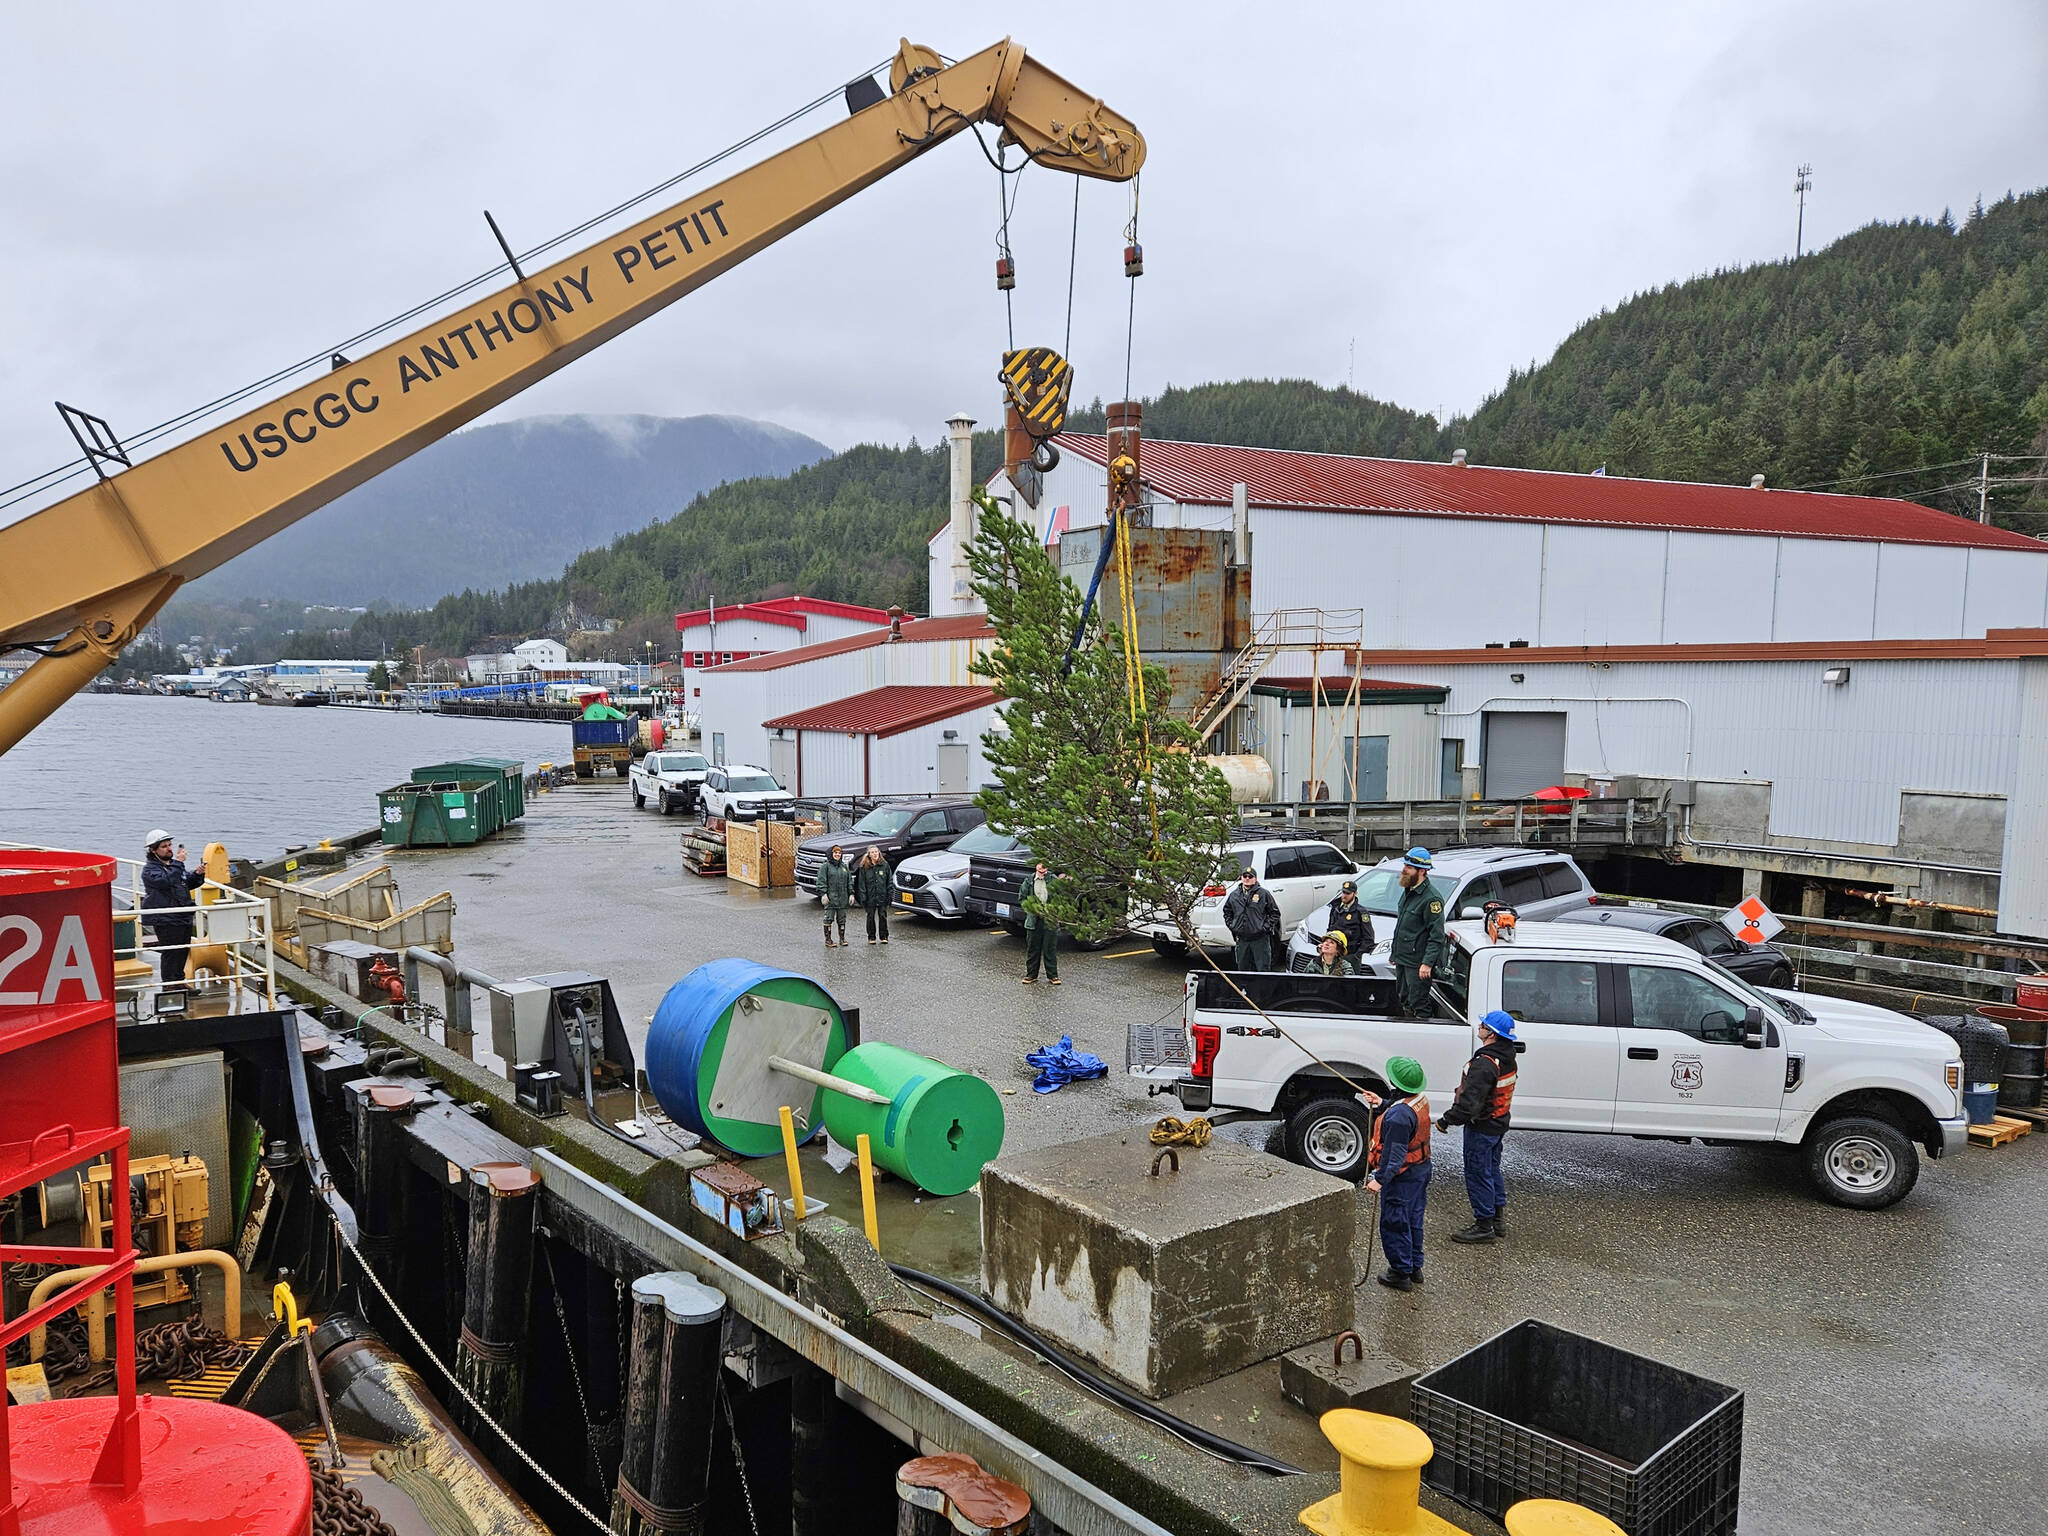 A 15-foot-long lodgepole pine is loaded from a truck onto the U.S. Coast Guard vessel Anthony Petit on Nov. 30. (Photo courtesy of the U.S. Forest Service)